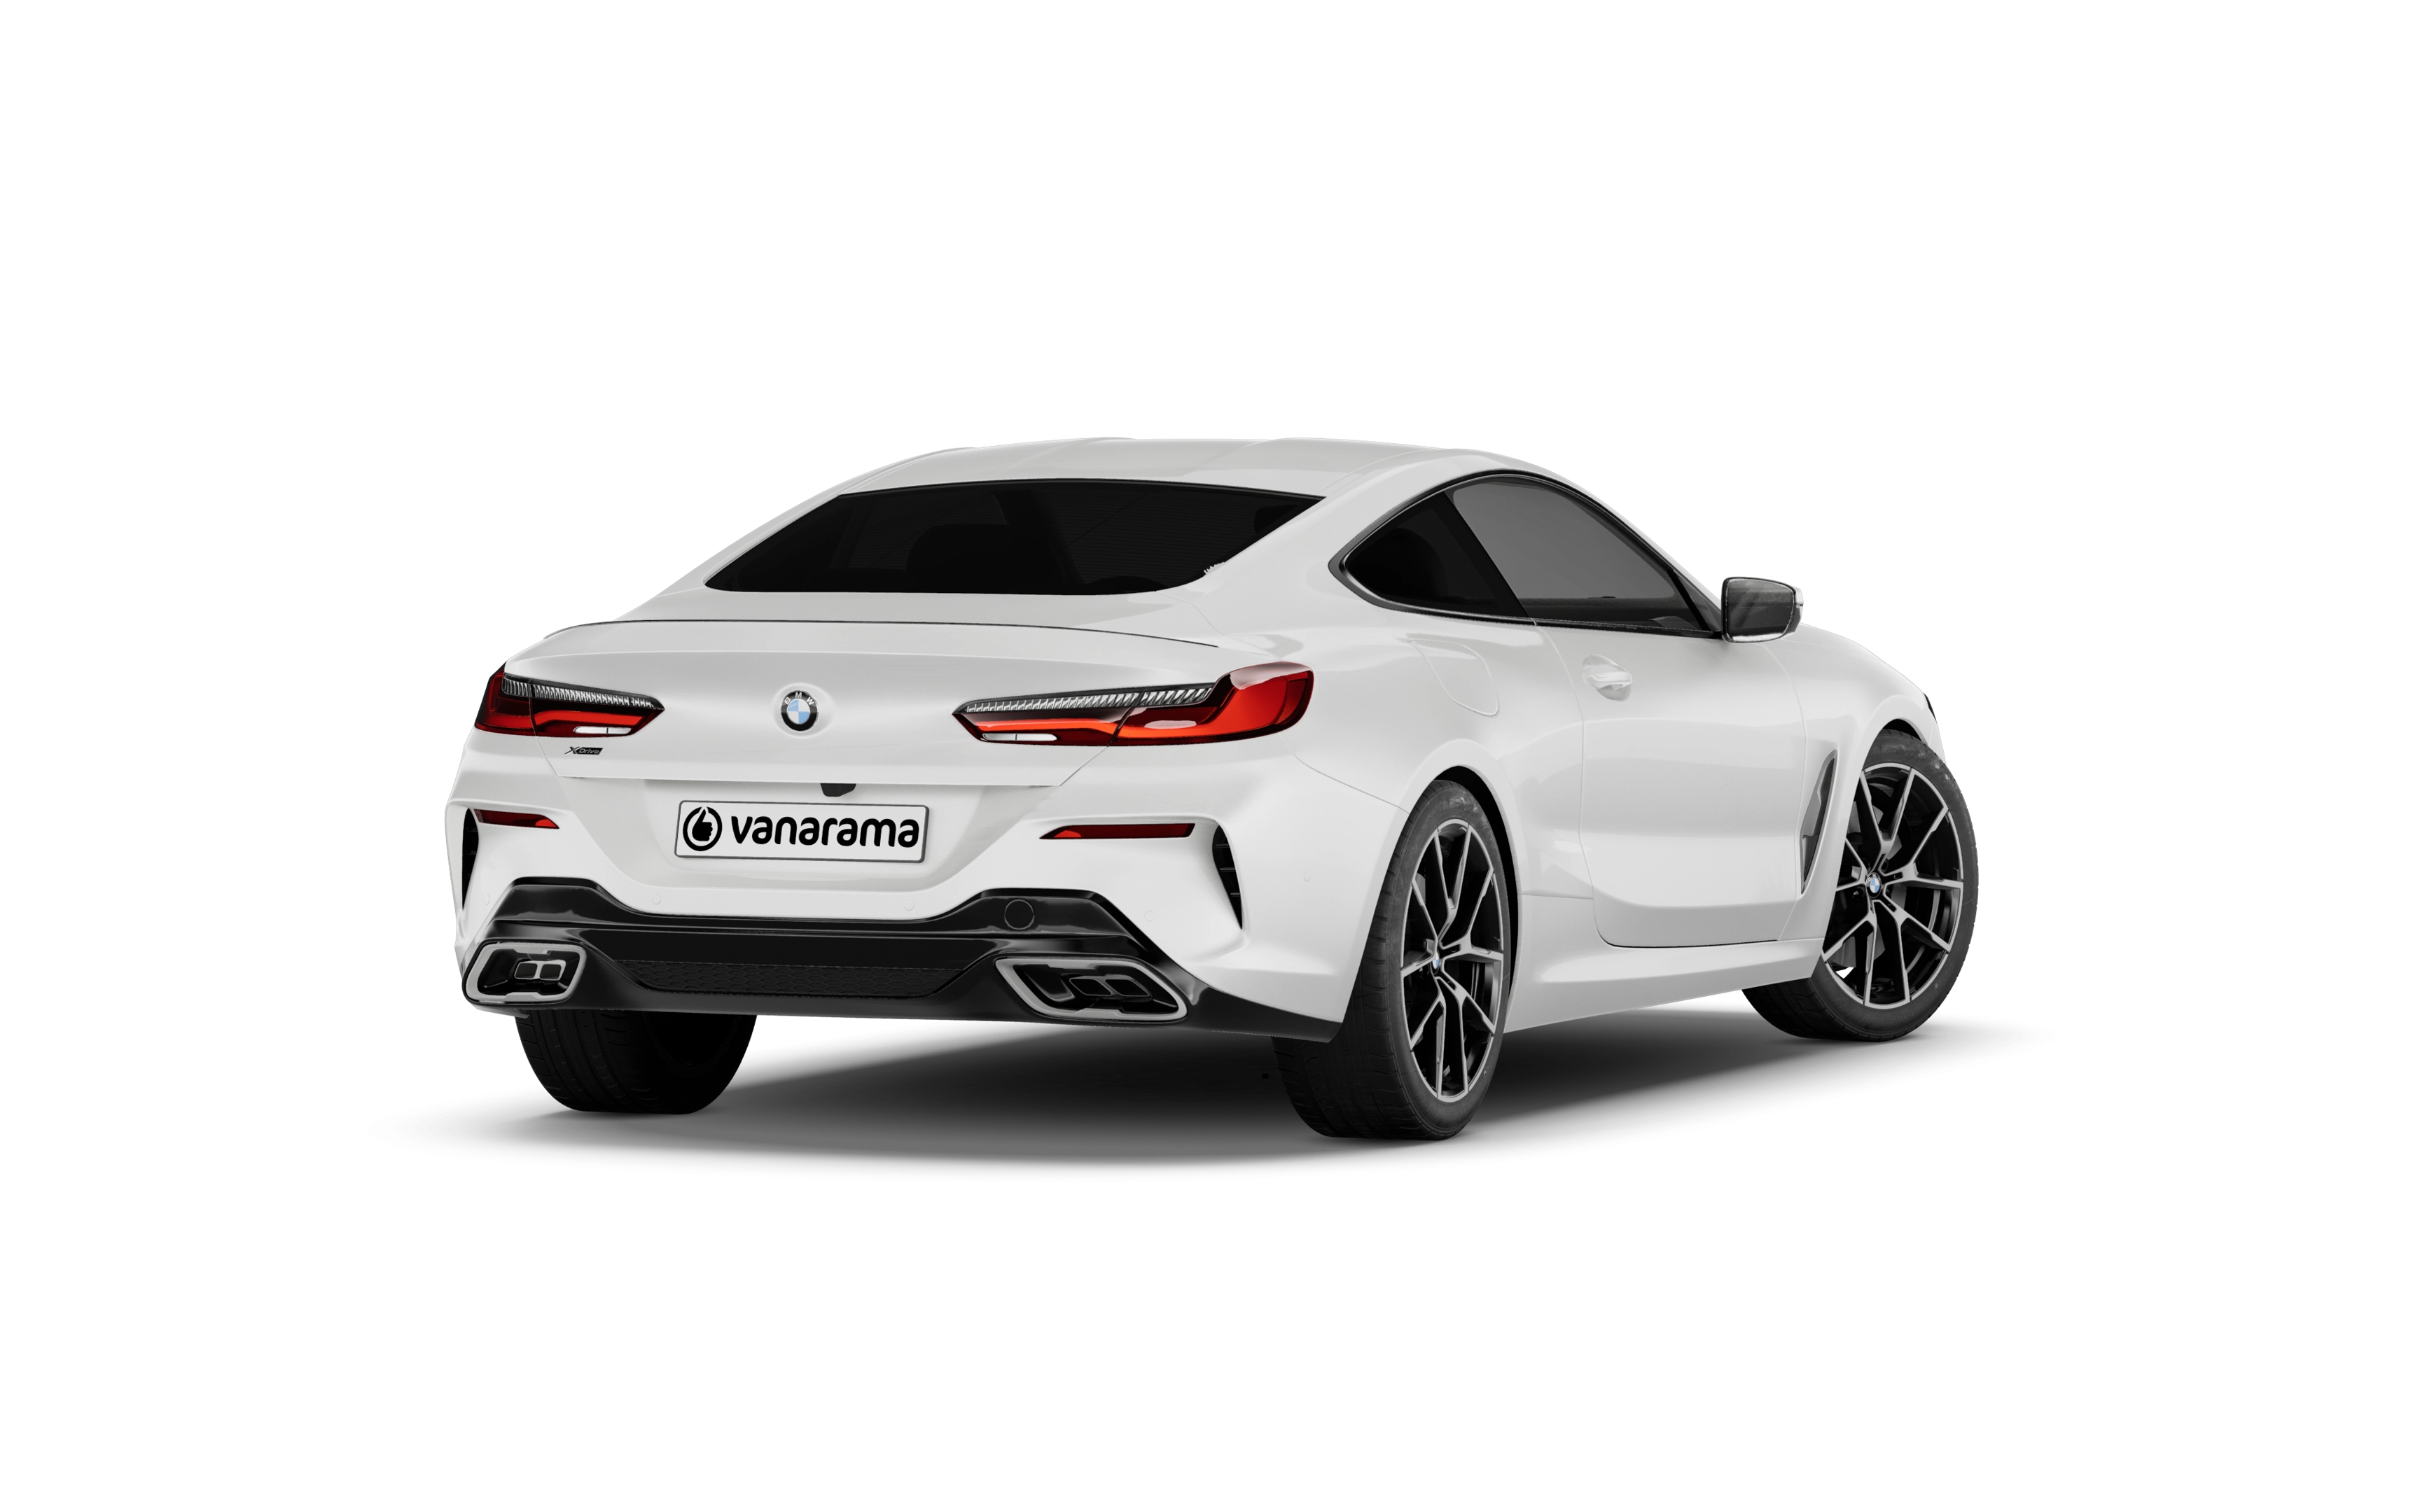 Bmw 8 series coupe m850i xdrive 2 doors auto [ultimate pack]